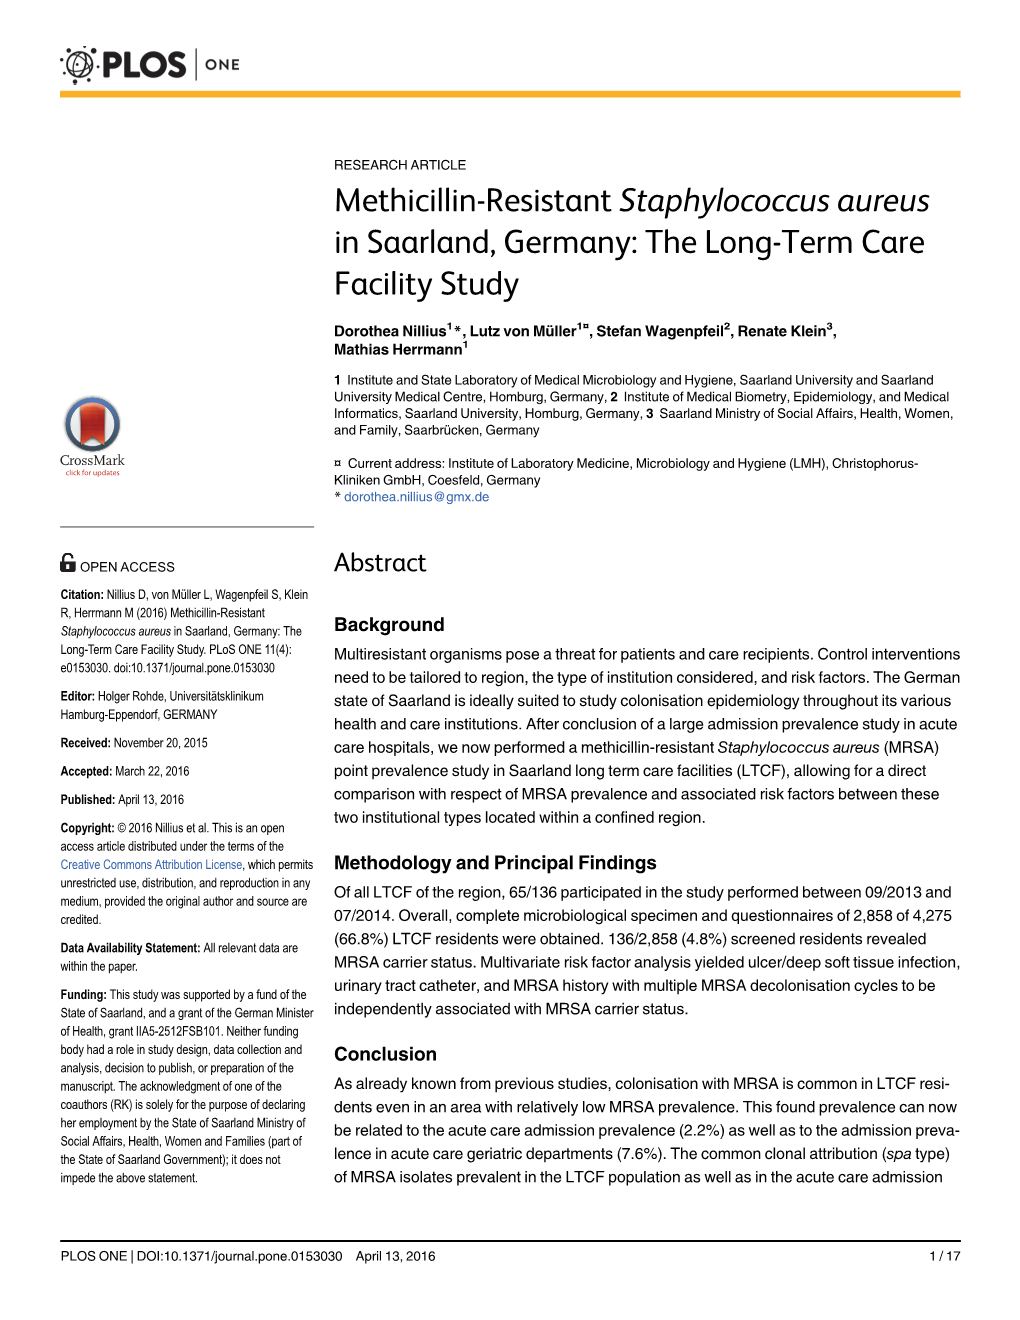 Methicillin-Resistant Staphylococcus Aureus in Saarland, Germany: the Long-Term Care Facility Study